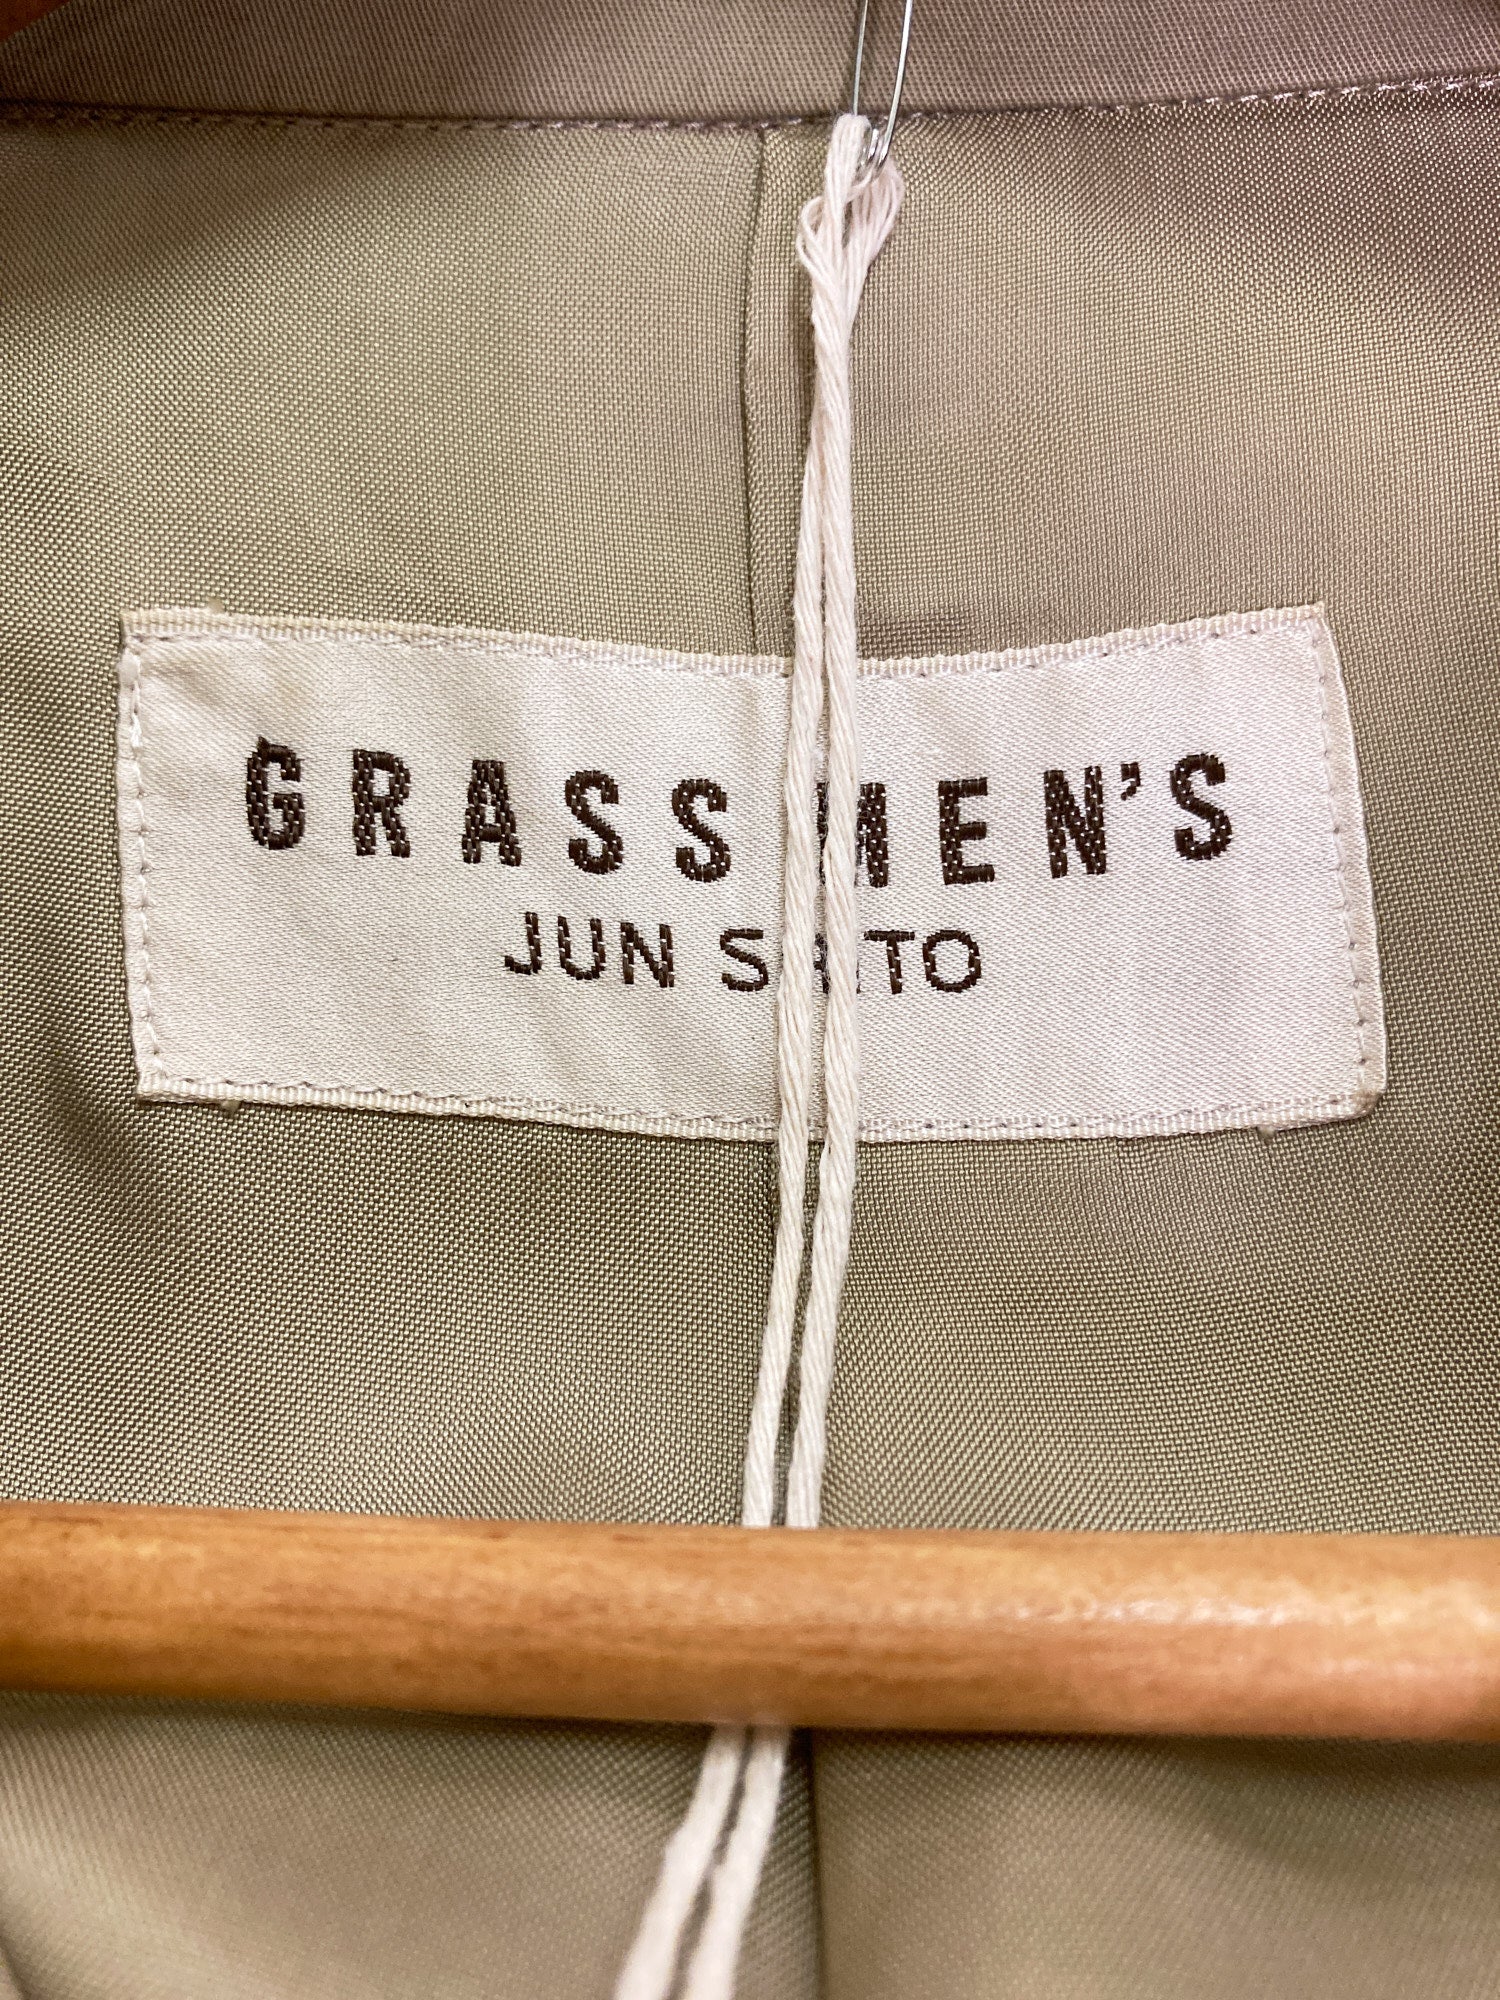 Grass Men's 1980s beige cotton double breasted trench coat - L M